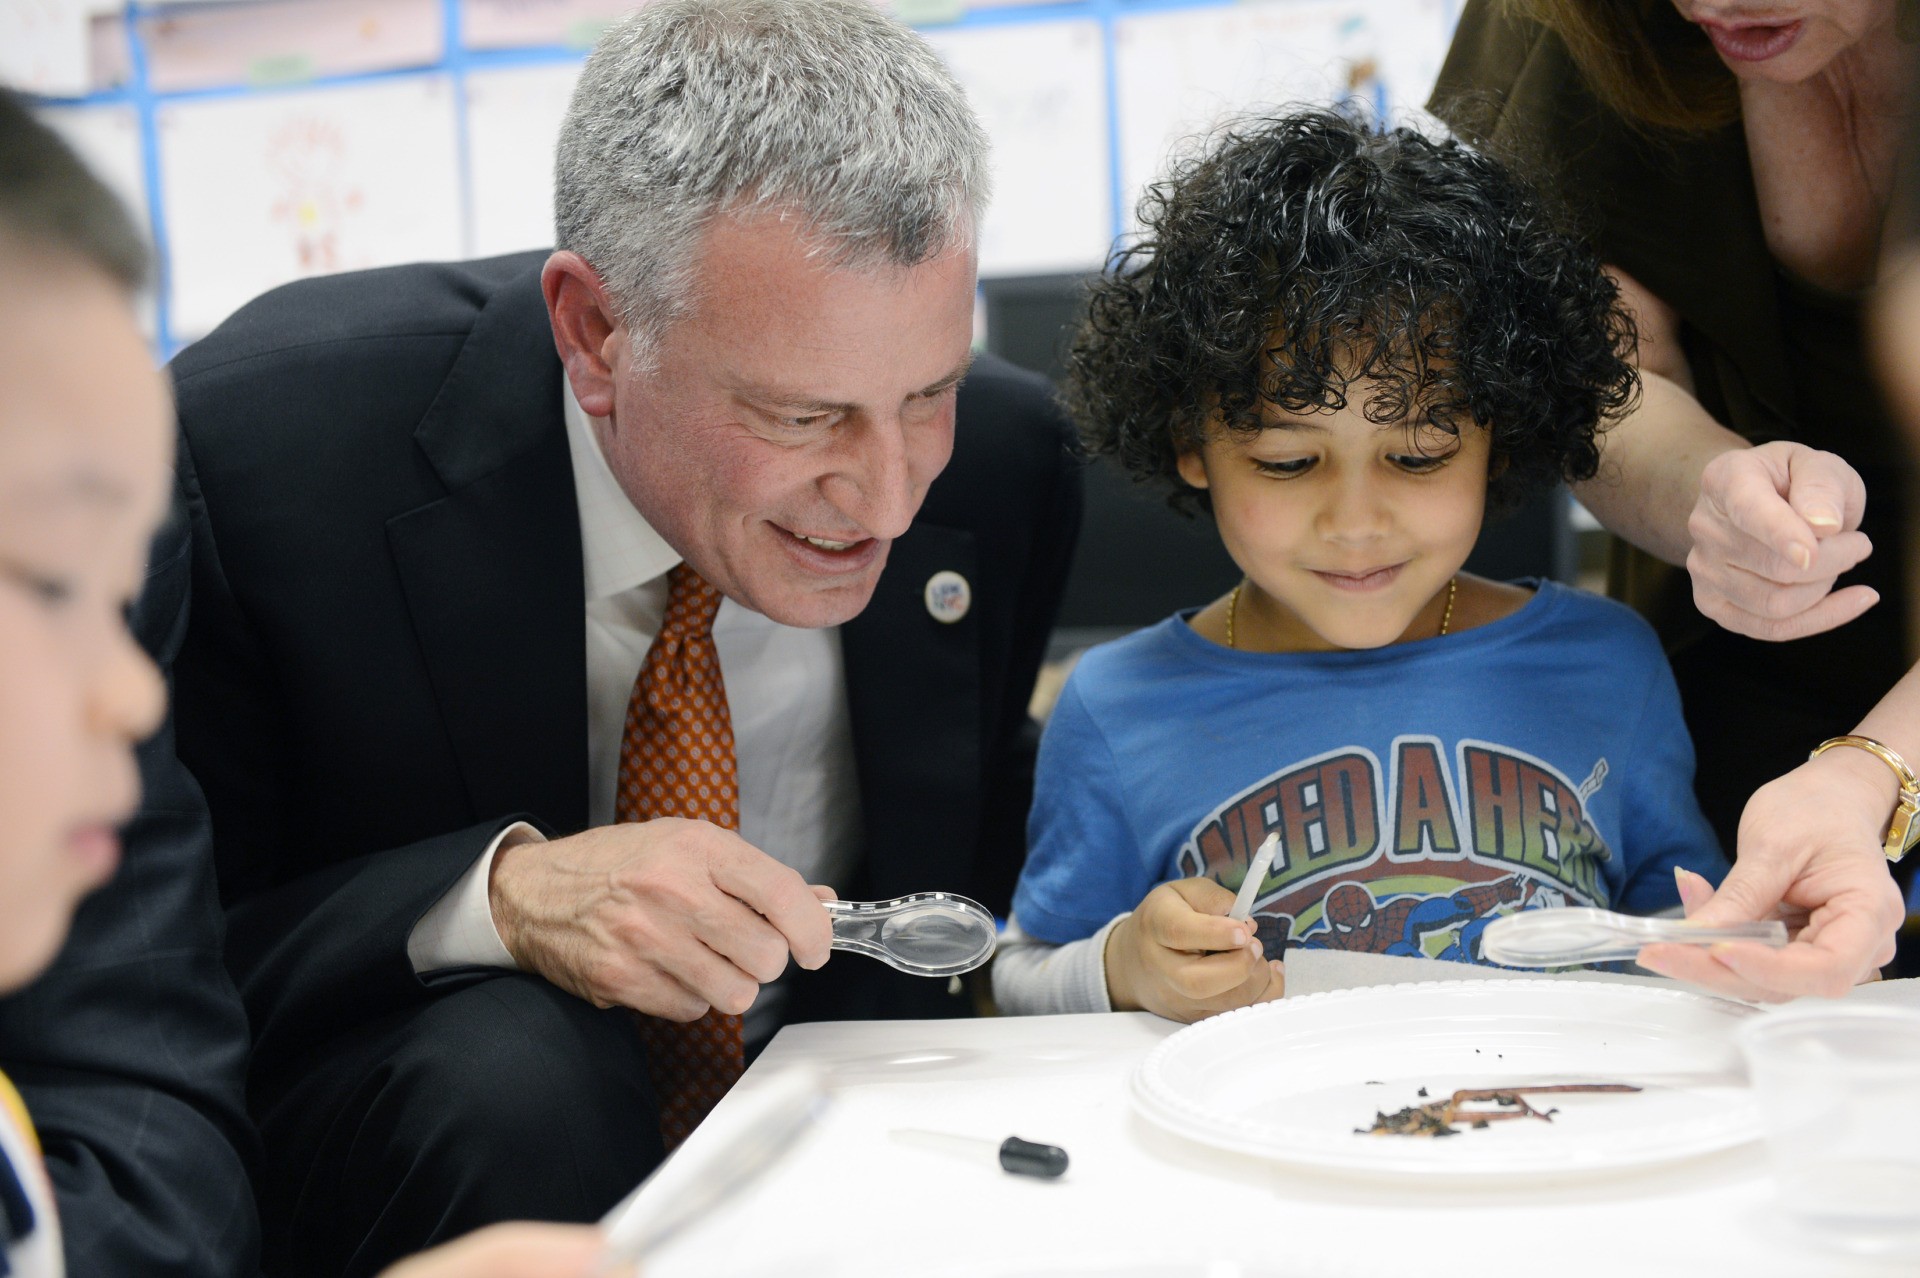 NEW YORK, NY - APRIL 03: New York City Mayor Bill de Blasio and student Justin De La Cruz work on a science project with worms during a visit to a pre-K classroom at P.S.1 on Henry St. in Manhattan on April 3, 2014 in New York City. Earlier de Blasio and Assembly Speaker Sheldon Silver announced a major media and community organizing push urging New Yorkers to sign their children up for pre-K. (Photo by Susan Watts-Pool/Getty Images)